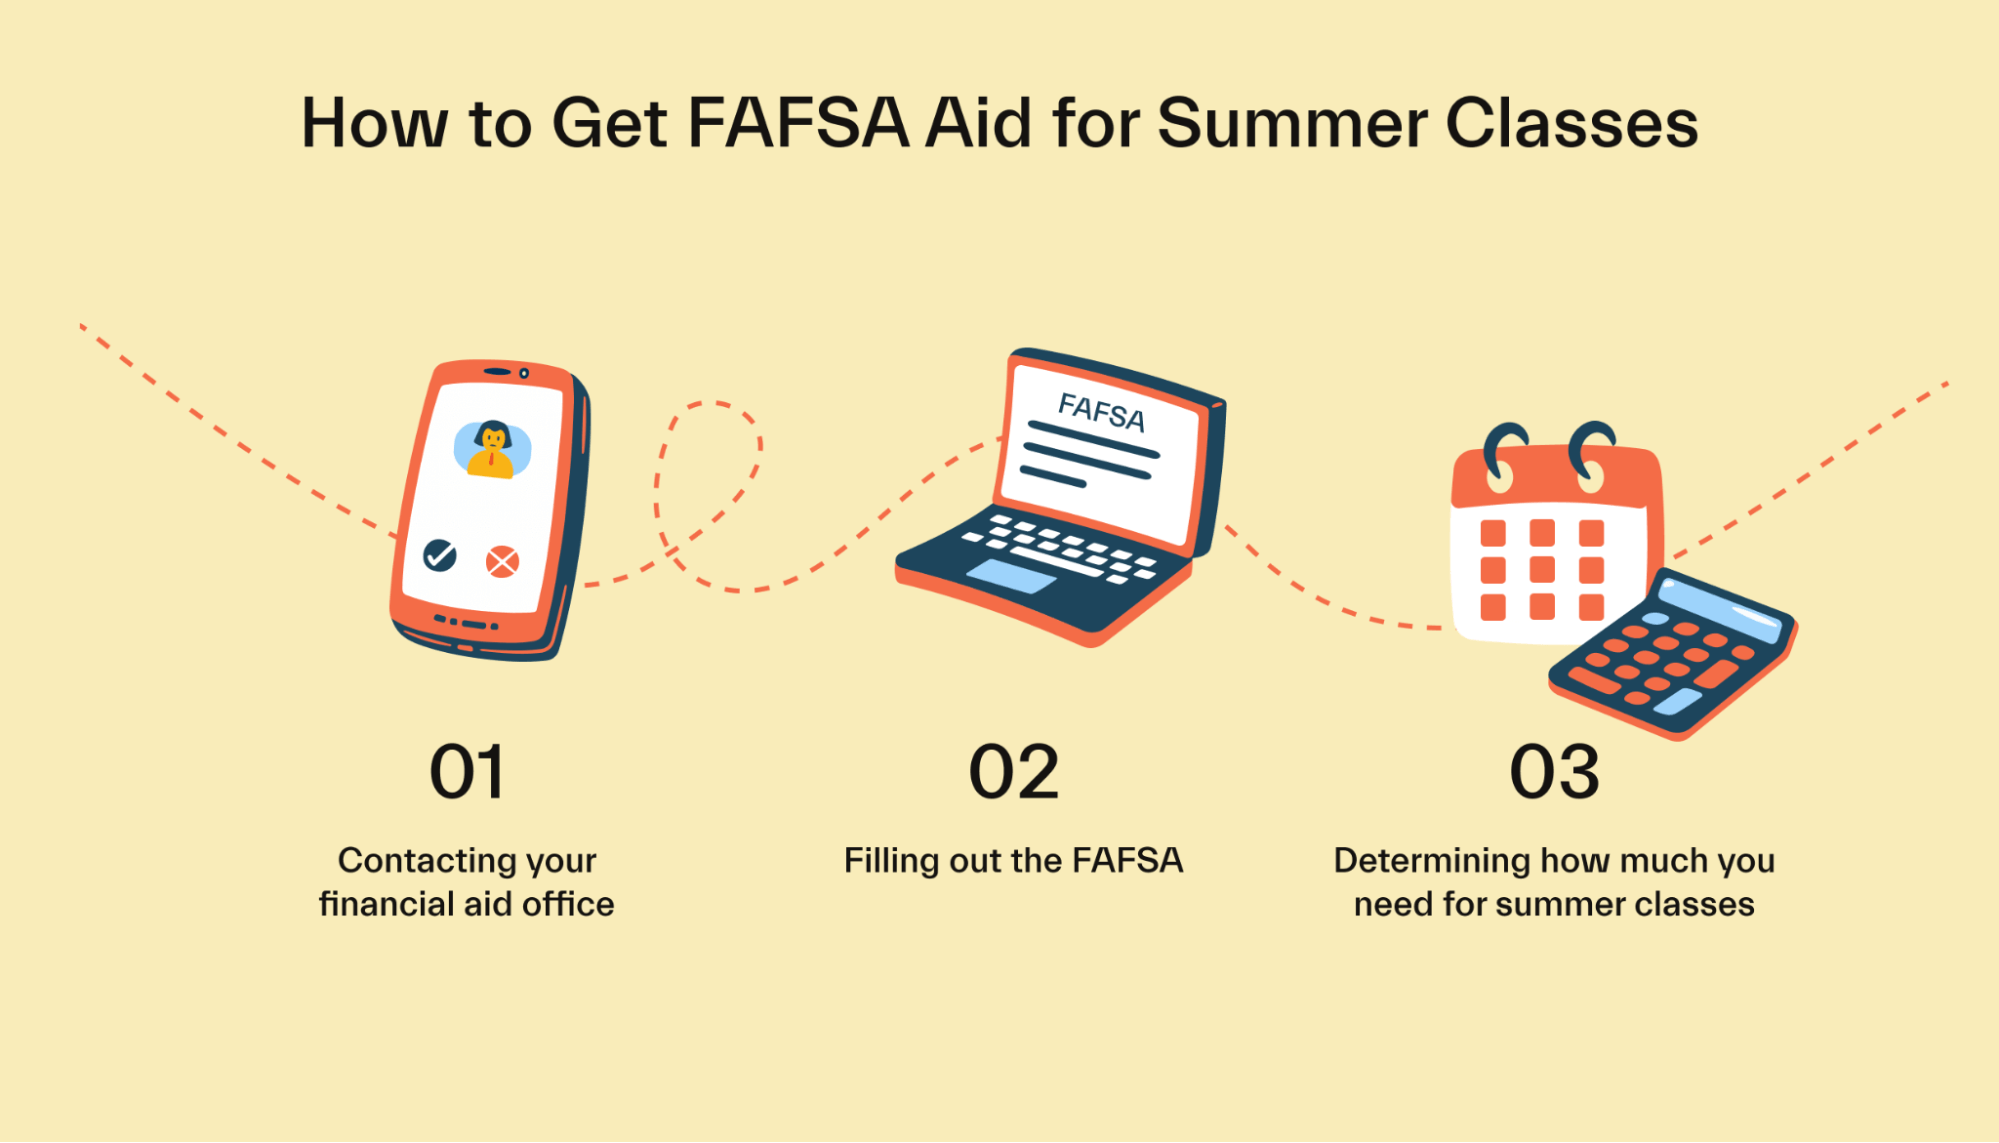 Does FAFSA cover summer classes?